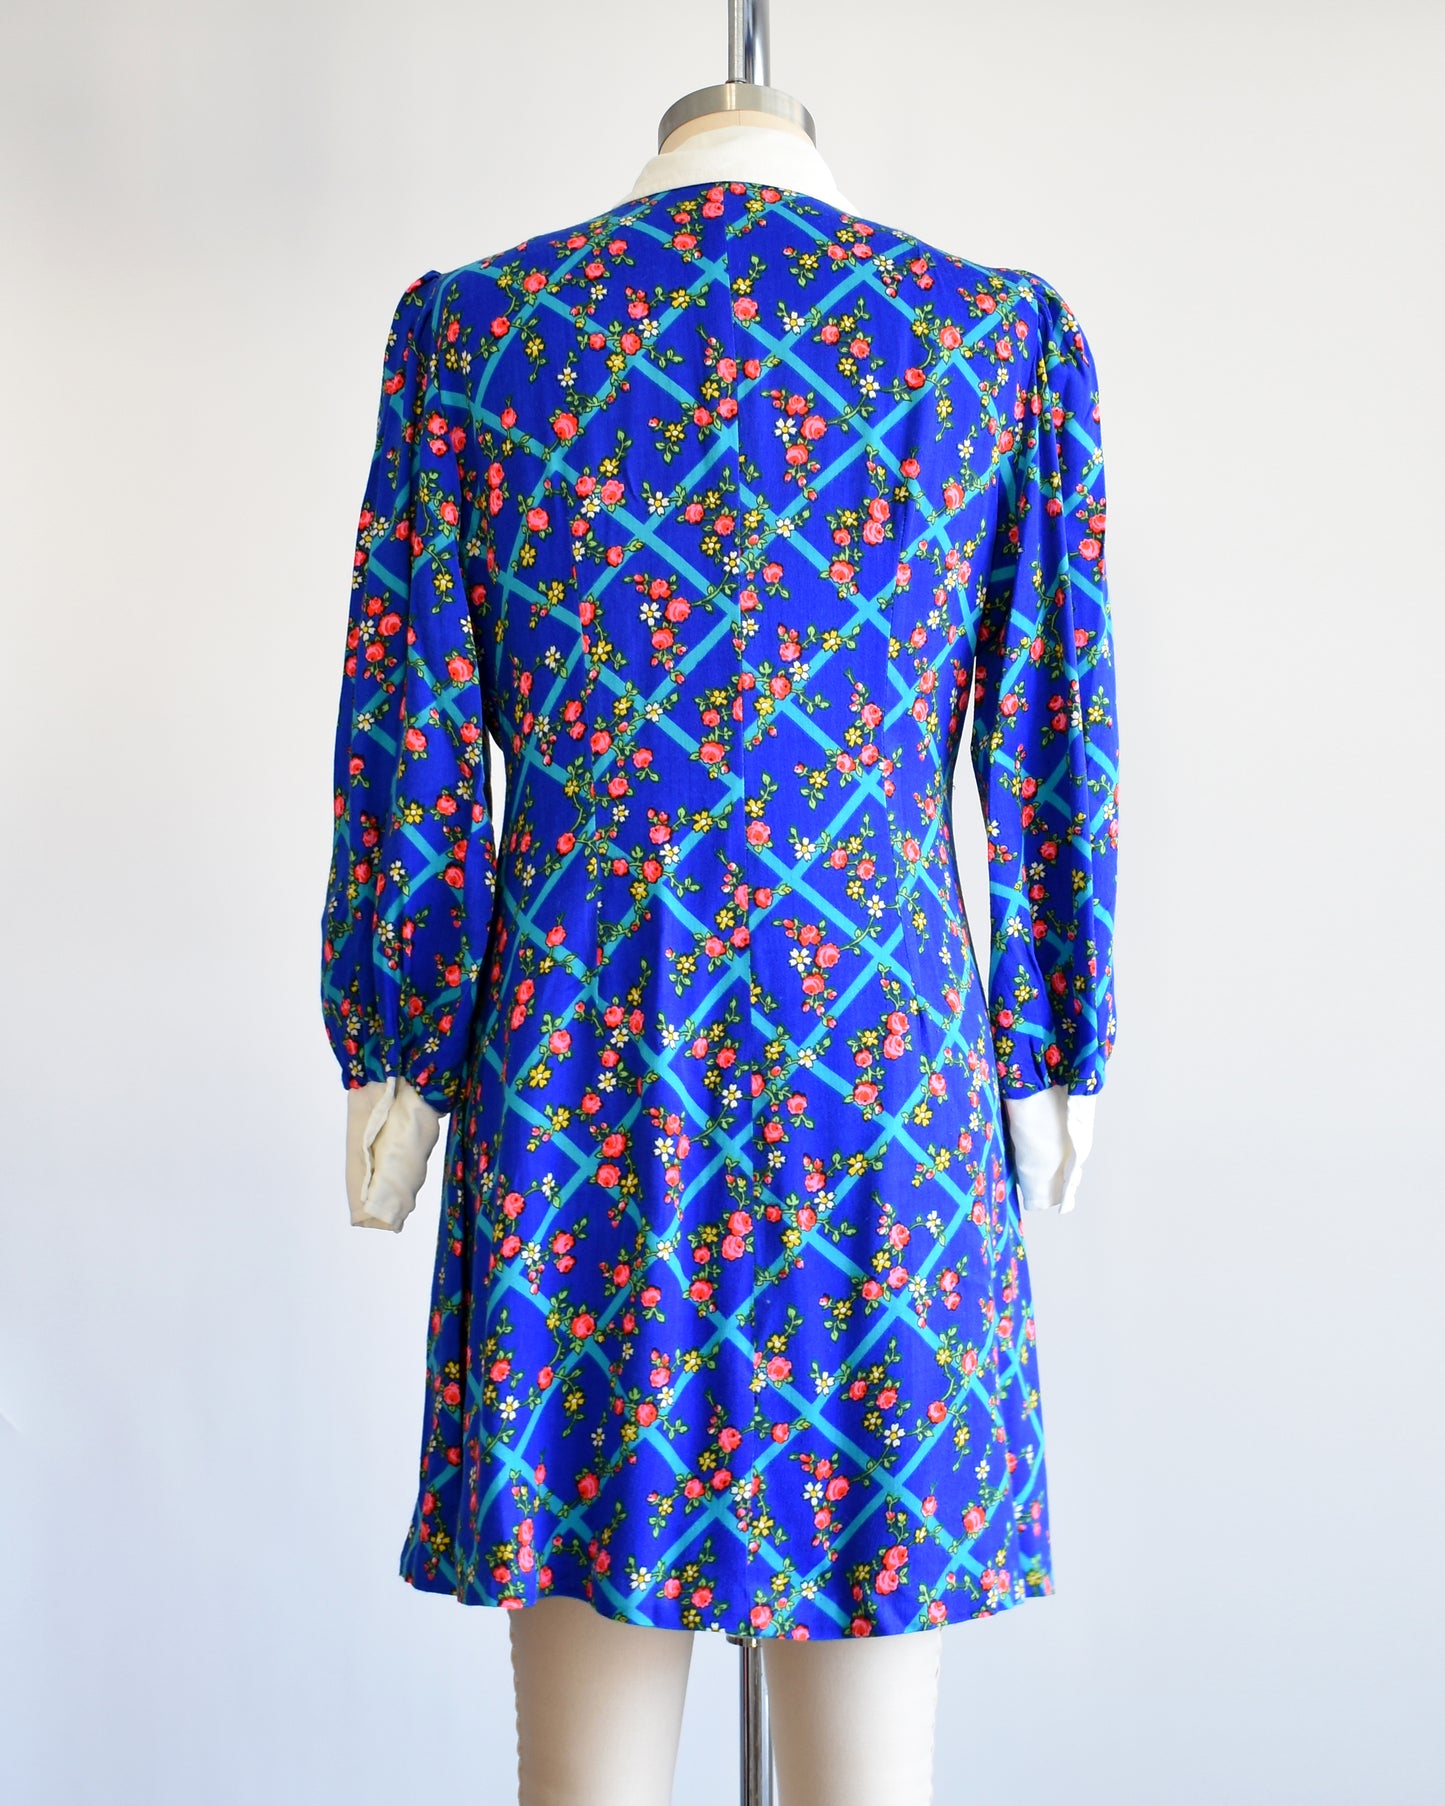 Back view of a vintage 1970s blue floral mini dress that has a white collar with matching cuffs, and white buttons down the front.